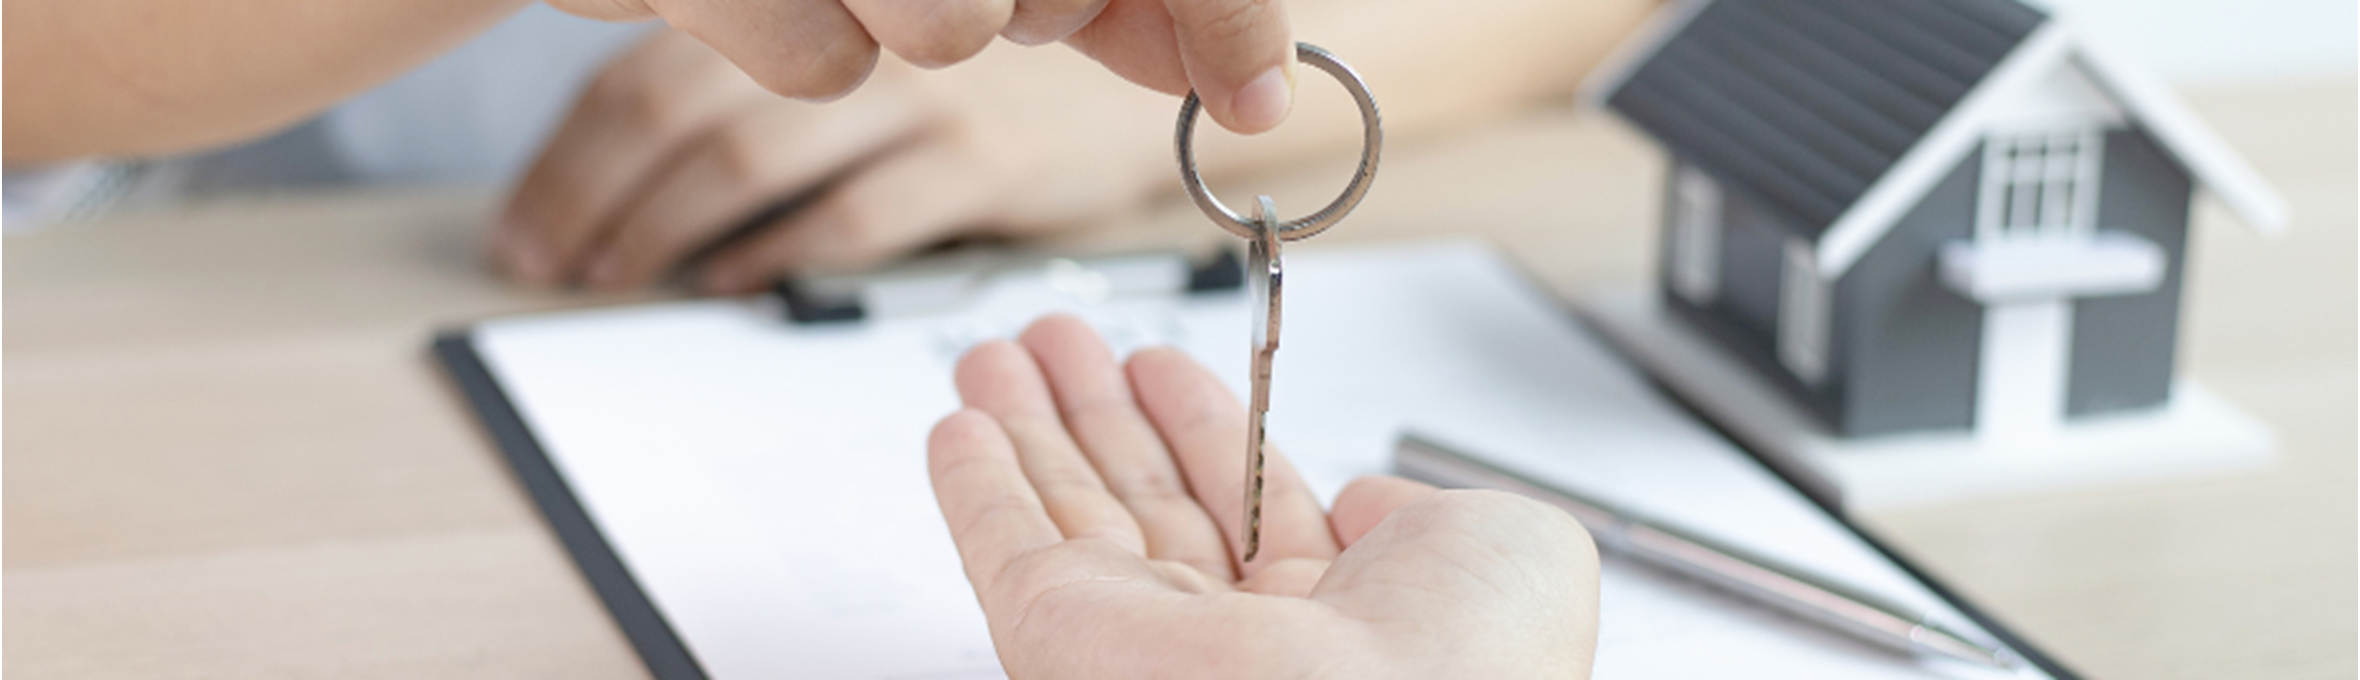 a person handing over a set of keys for a rented property 